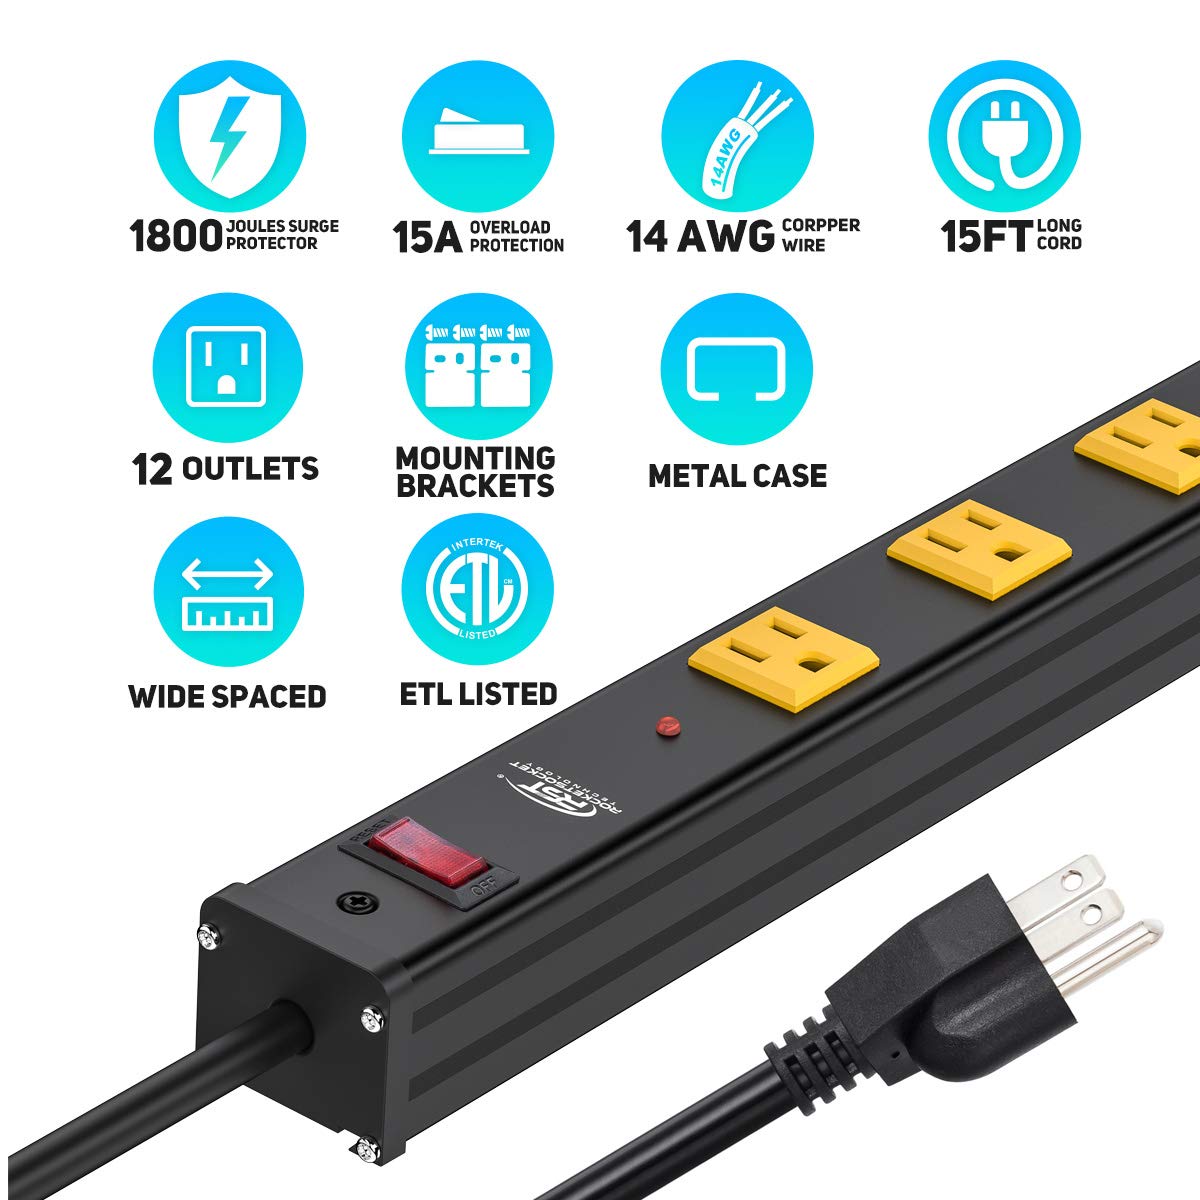 CRST Heavy Duty Surge Protector Power Strip Wide Spaced 12-Outlet 15 Feet Long Extension Cord with Mounting Brackets 15A Circuit Breaker 1800 Joules…